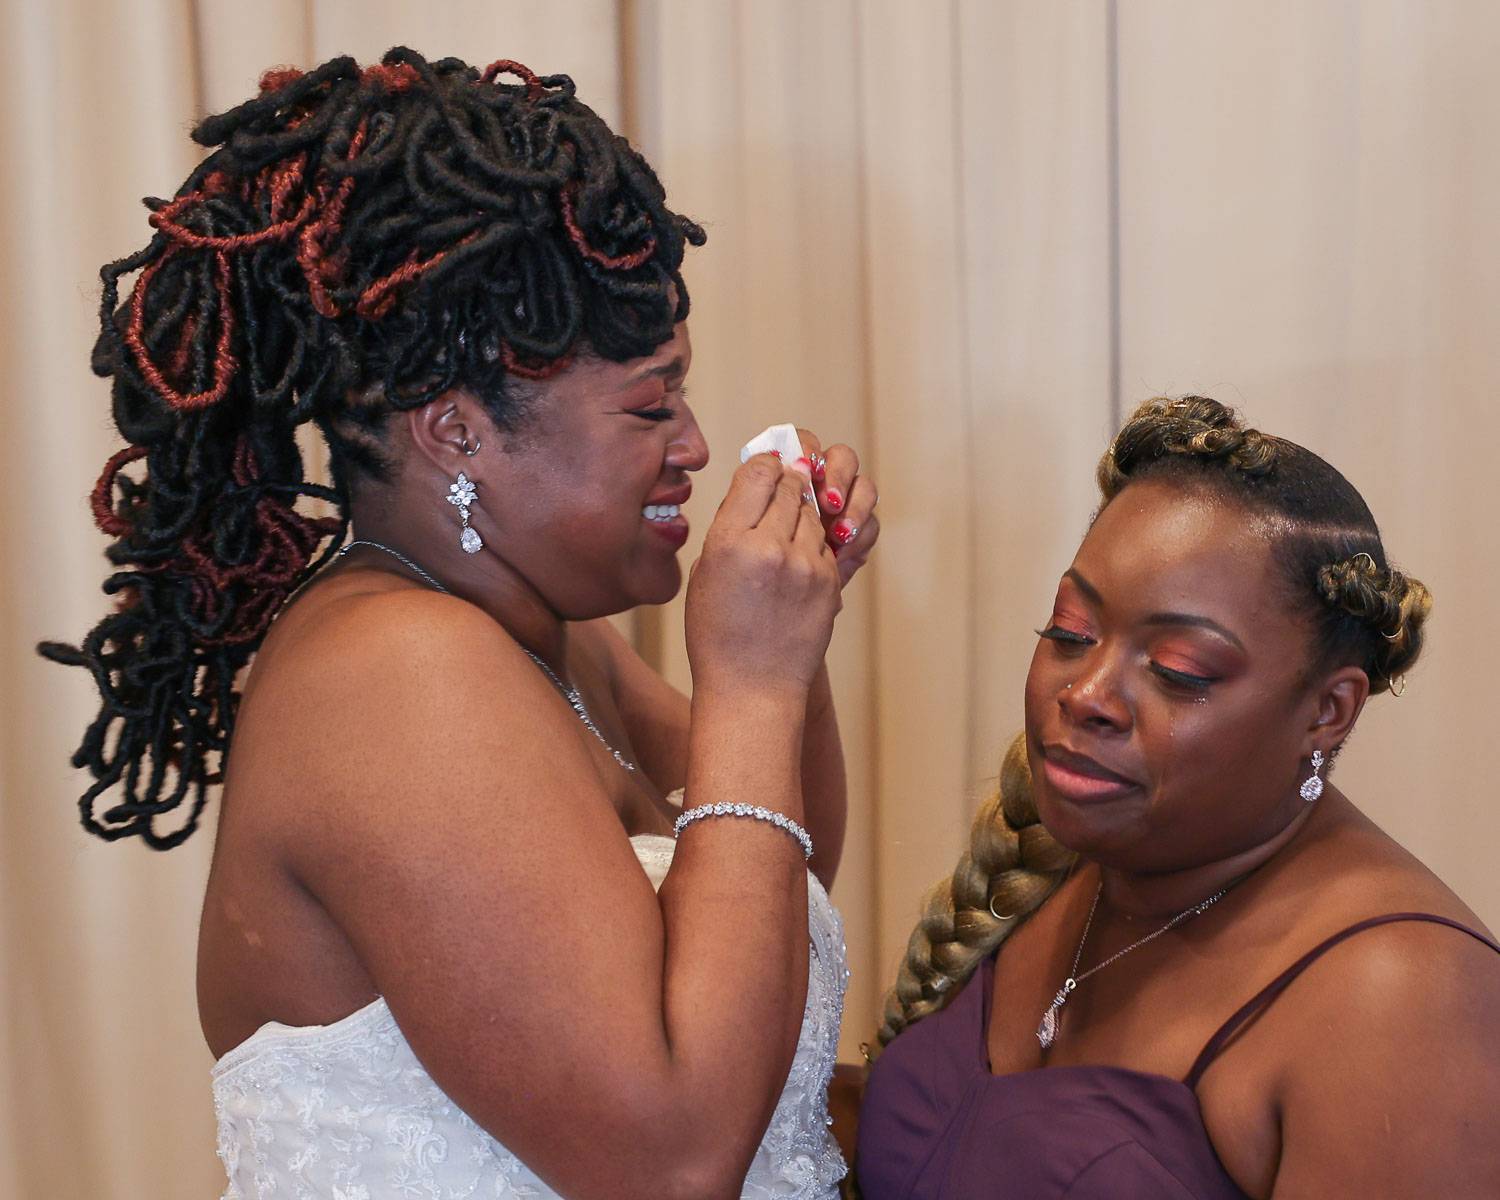 The bride wiping her tears while smiling